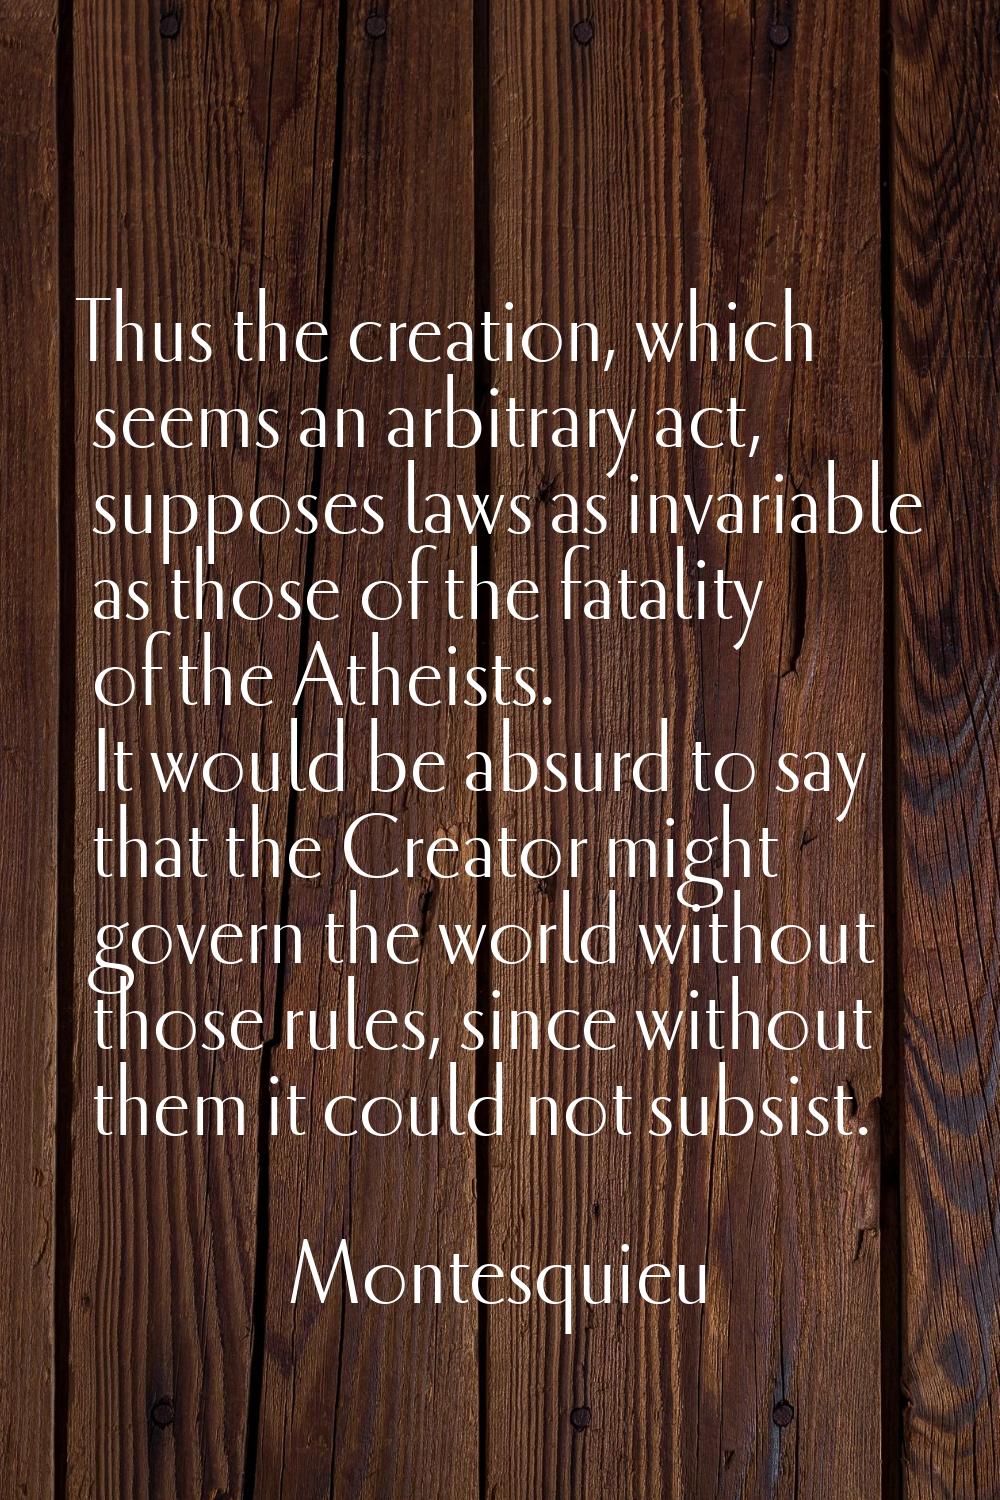 Thus the creation, which seems an arbitrary act, supposes laws as invariable as those of the fatali